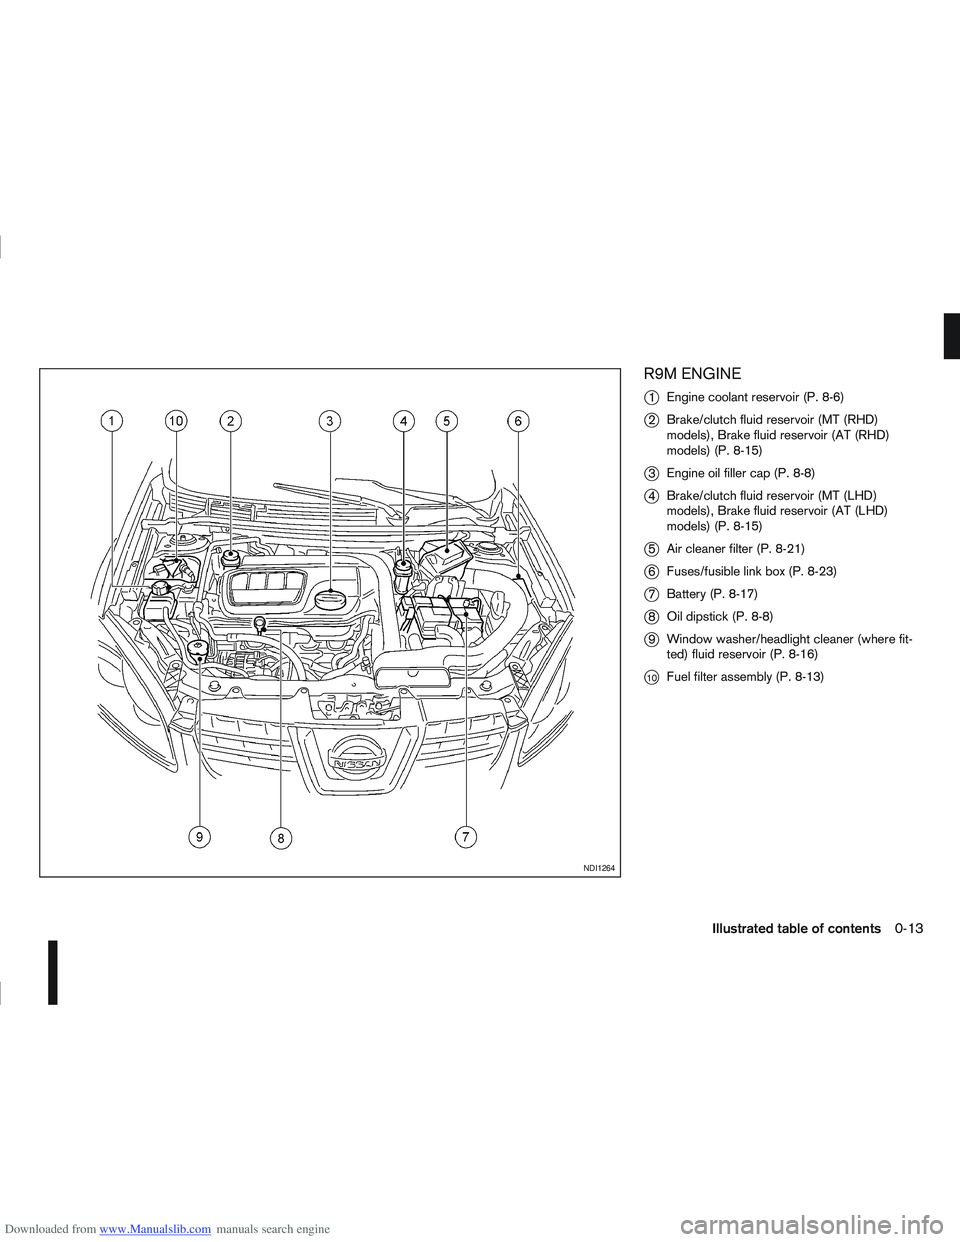 NISSAN QASHQAI 2009  Owners Manual Downloaded from www.Manualslib.com manuals search engine R9M ENGINE
j
1Engine coolant reservoir (P. 8-6)
j2Brake/clutch fluid reservoir (MT (RHD)
models), Brake fluid reservoir (AT (RHD)
models) (P. 8